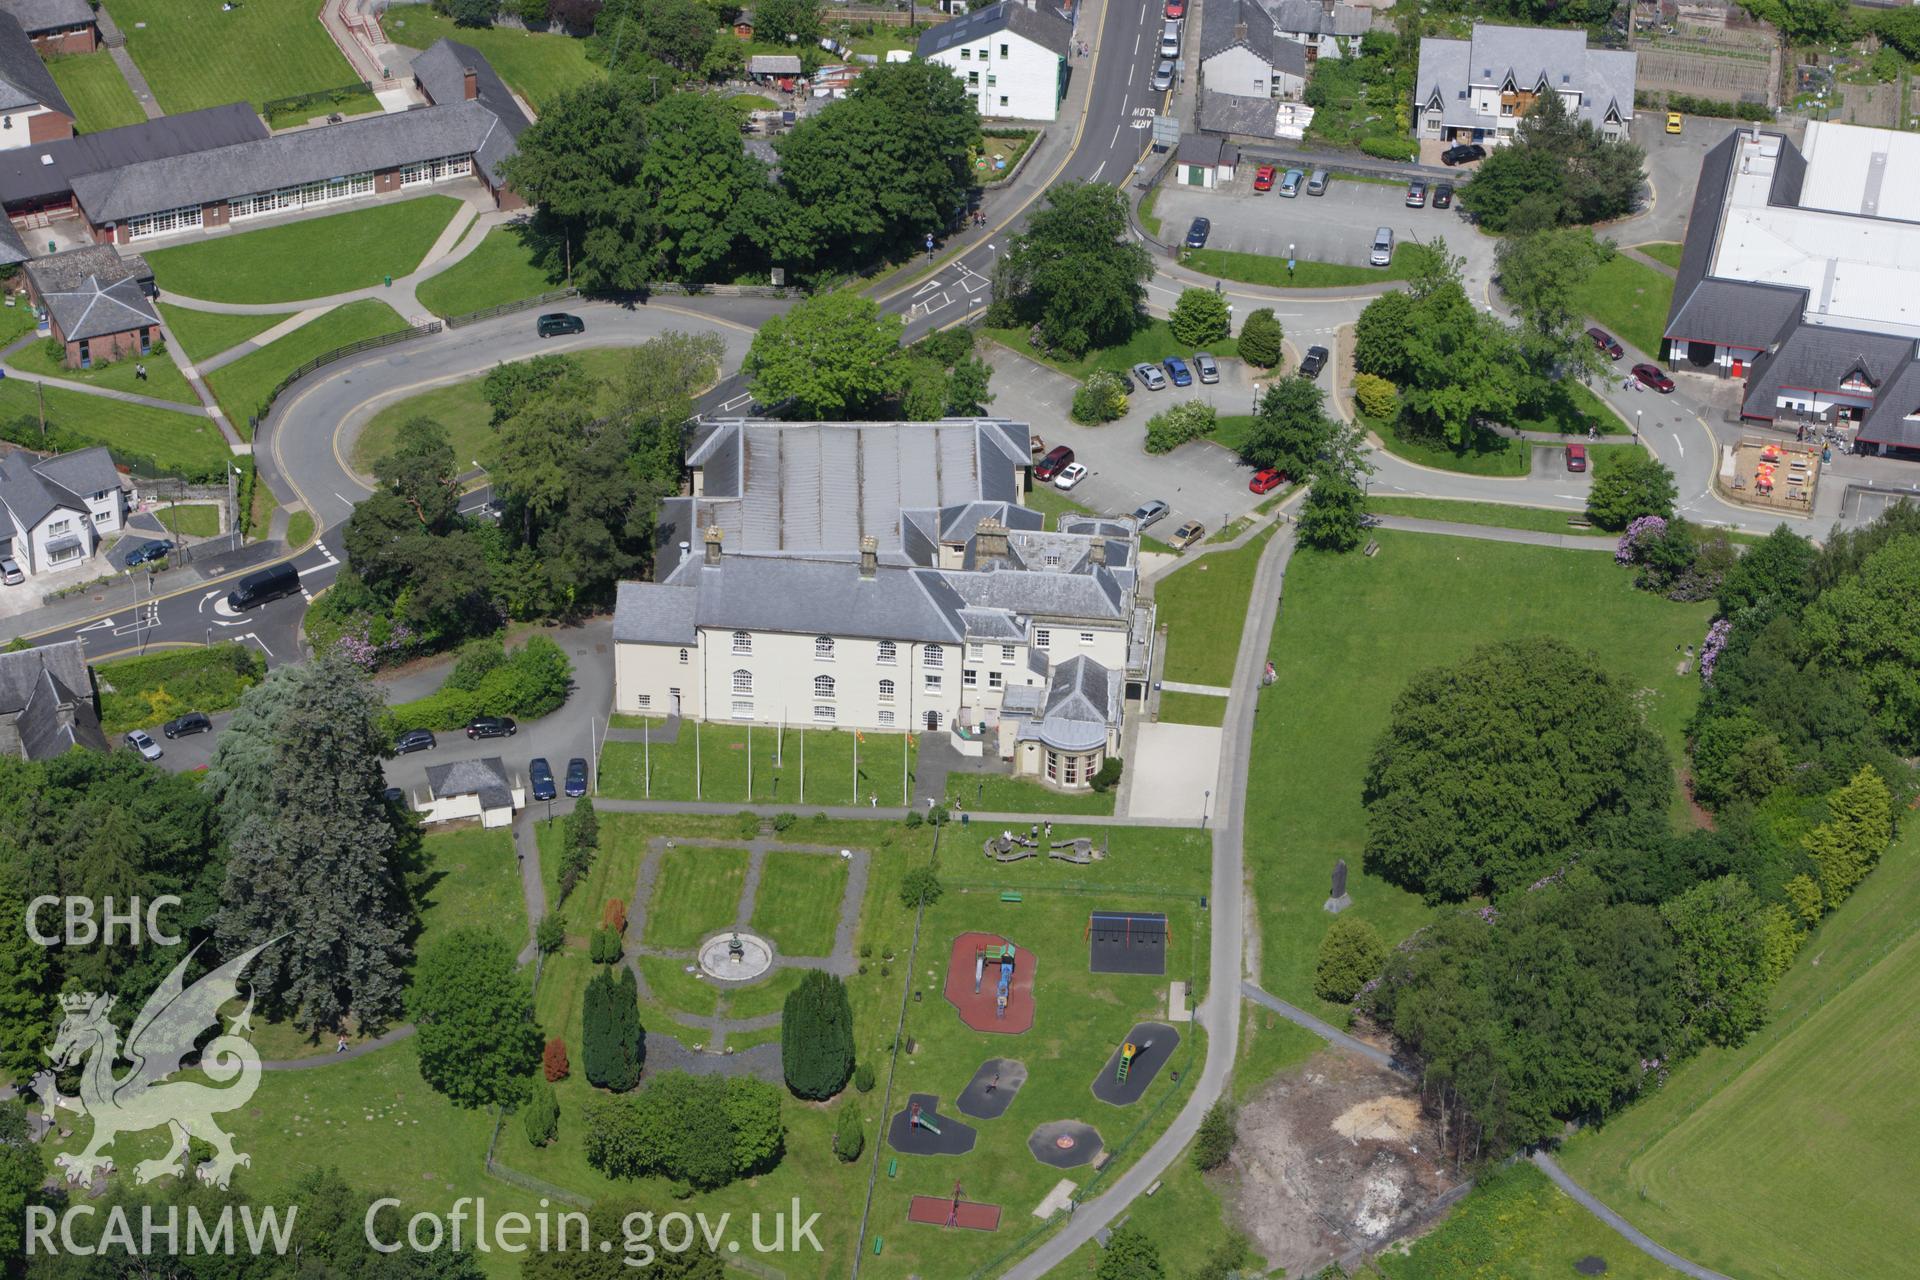 RCAHMW colour oblique aerial photograph of Plas Machynlleth. Taken on 02 June 2009 by Toby Driver